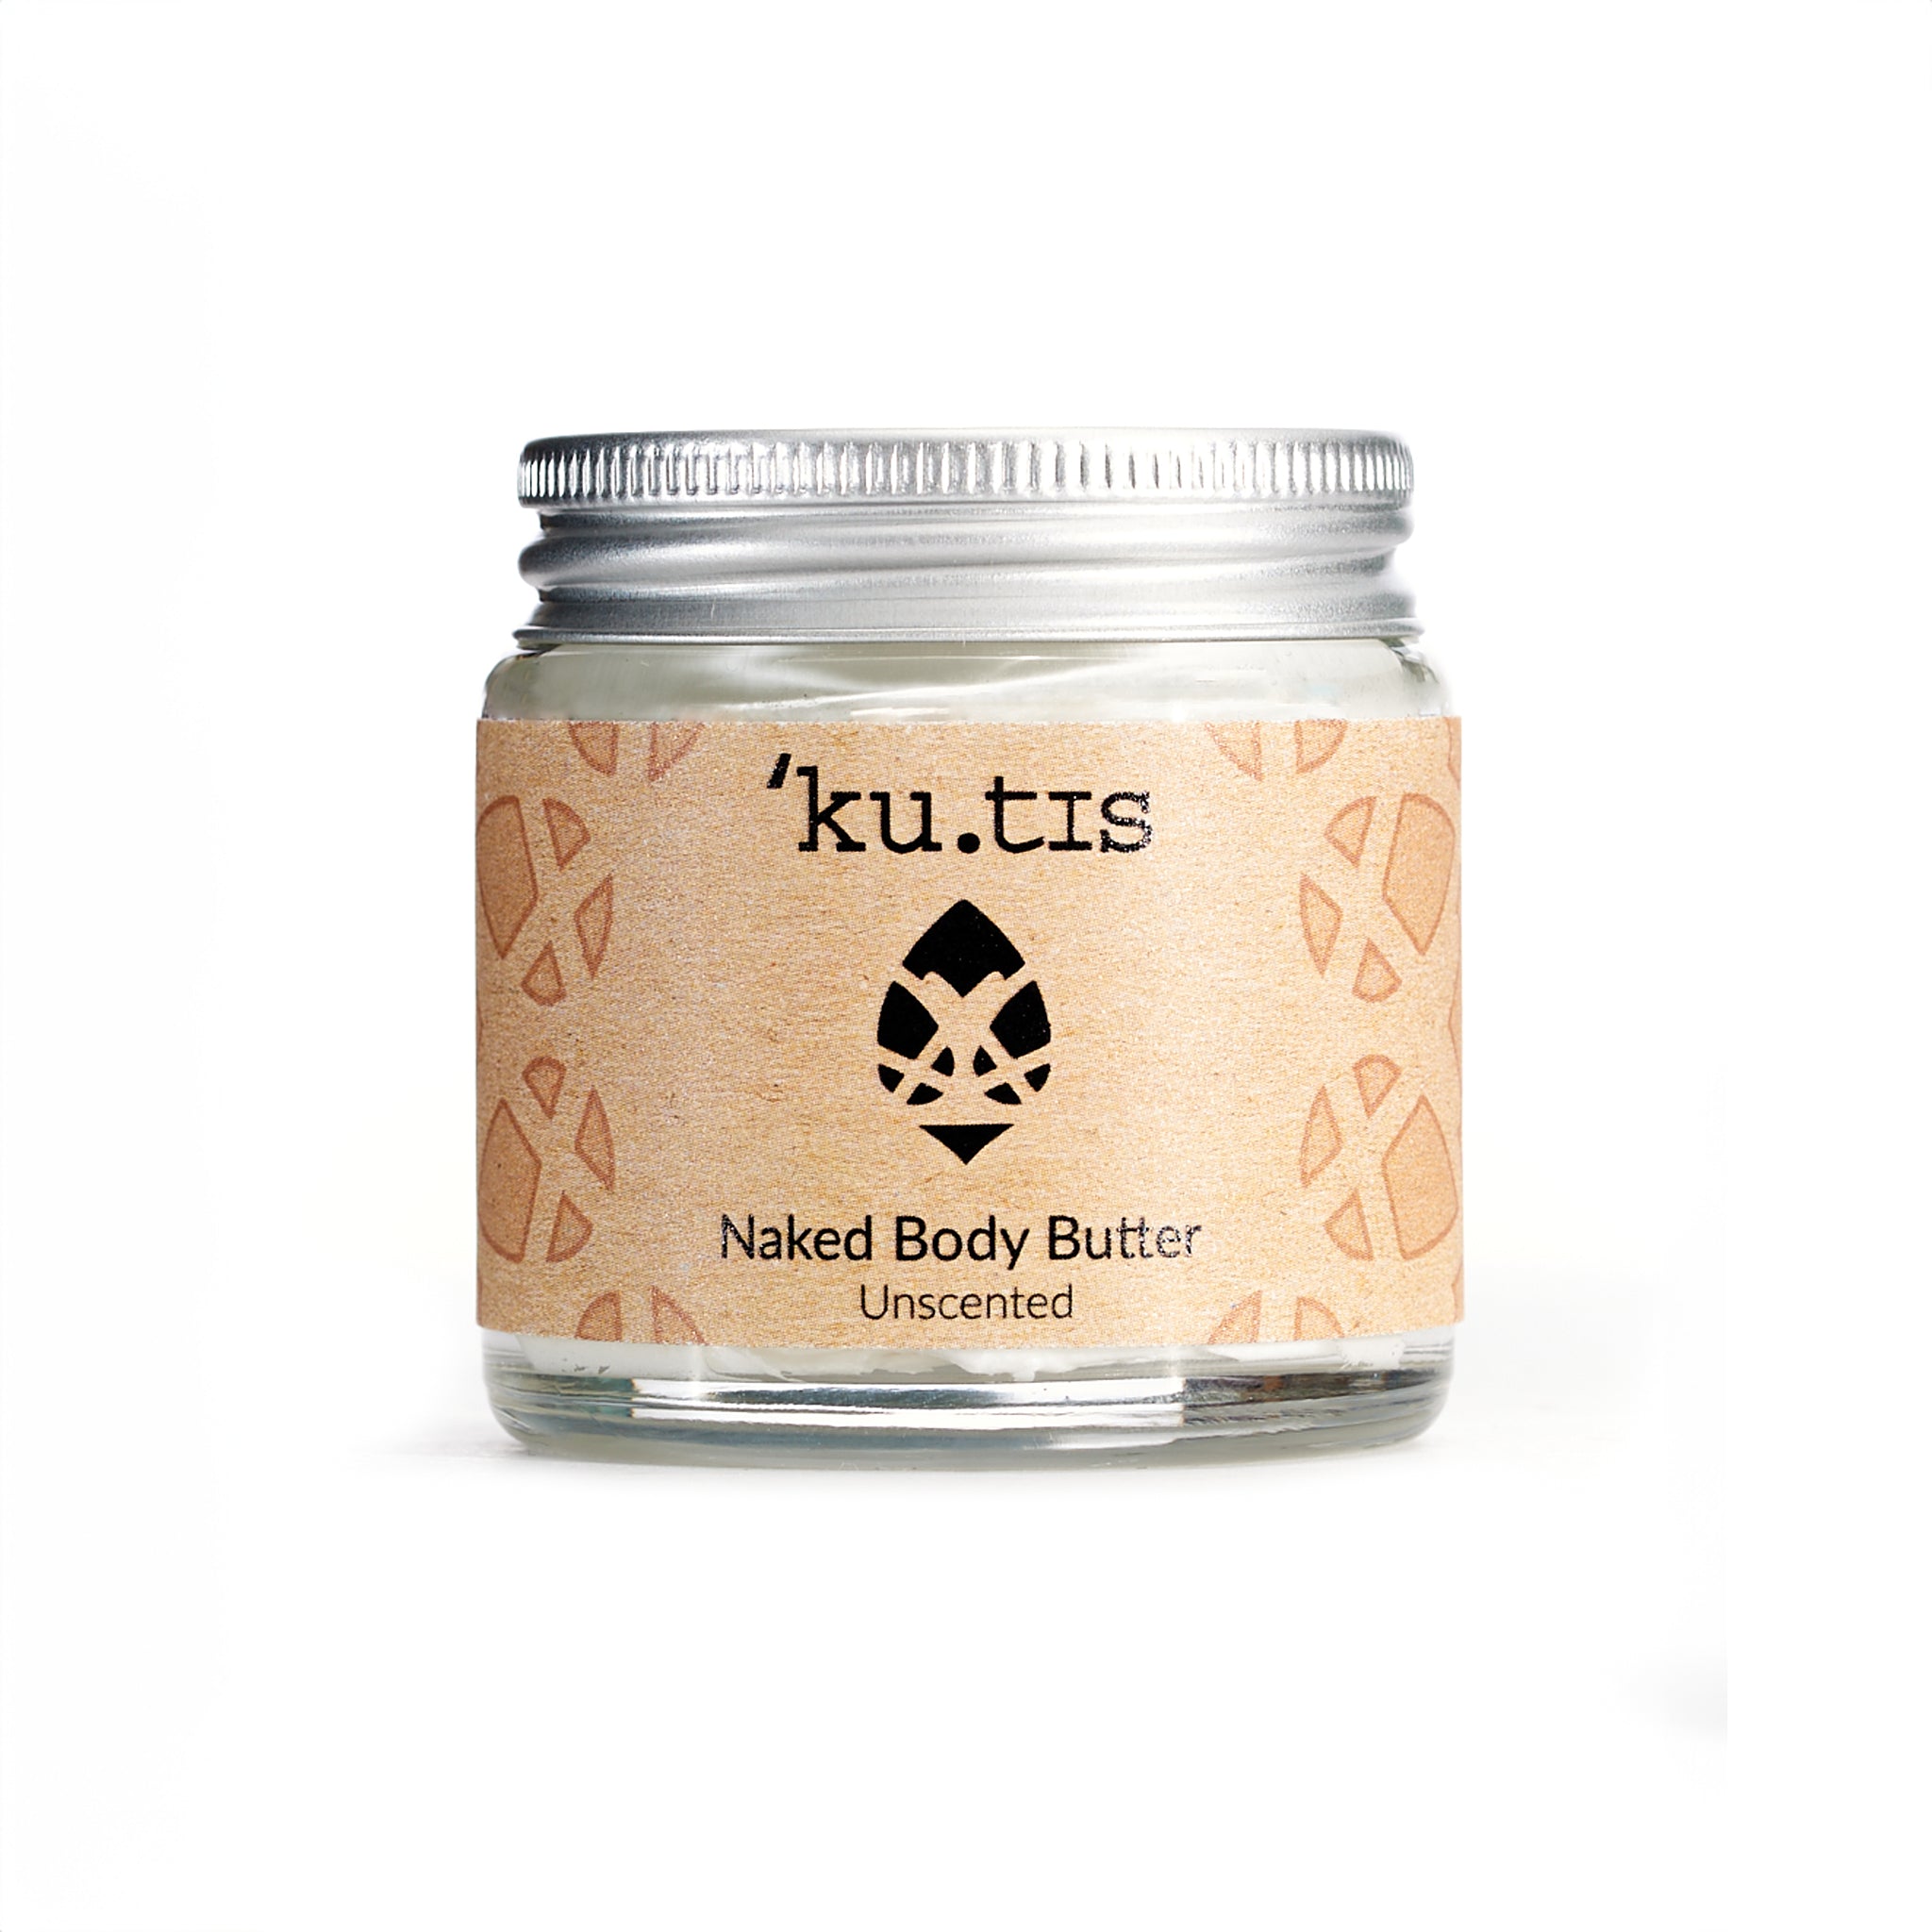 Natural unscented naked body butter moisturiser in a glass jar with an aluminium screw top silver lid.